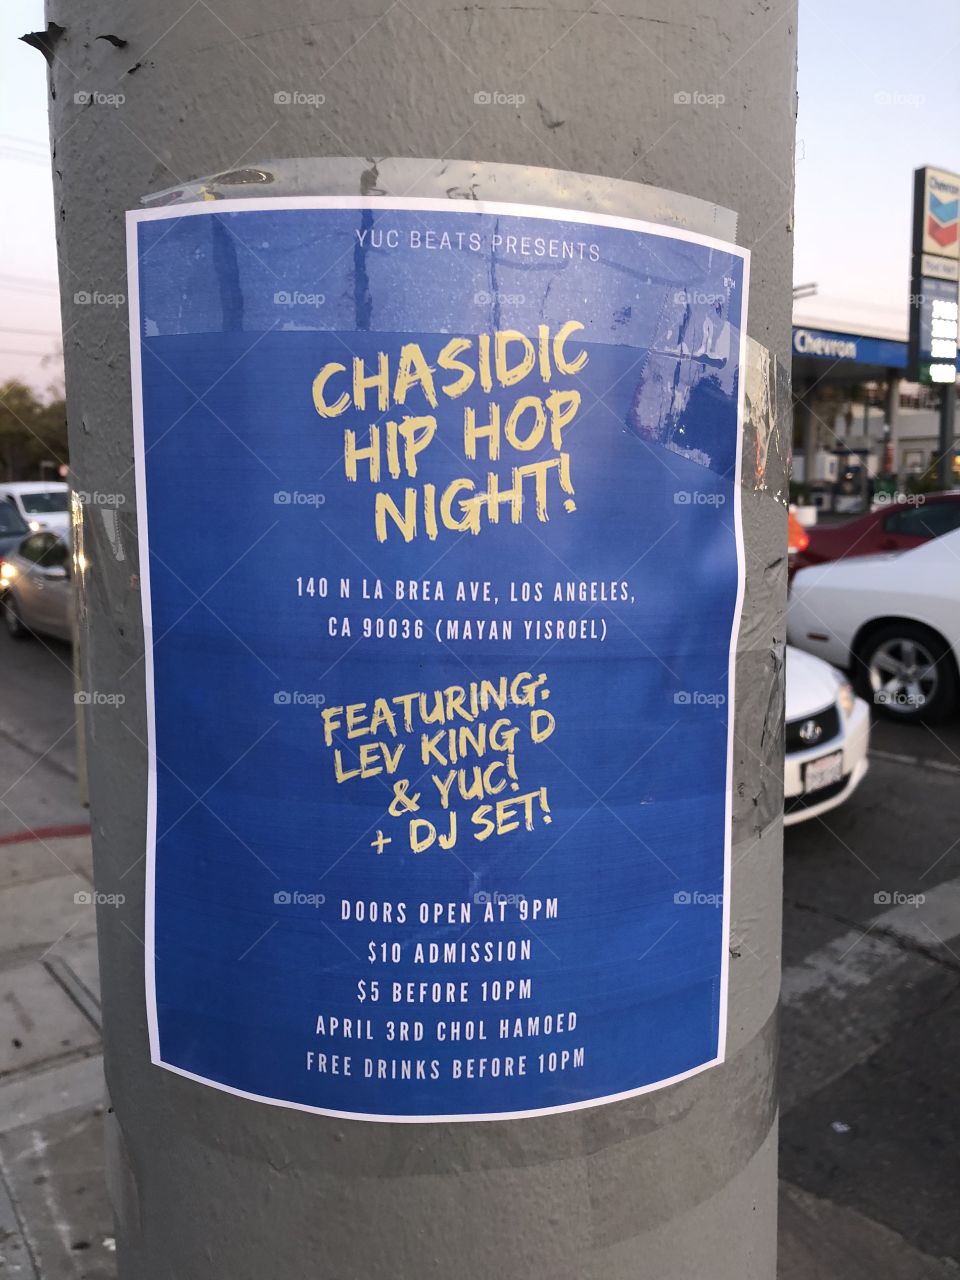 Chasidic hip hop party poster